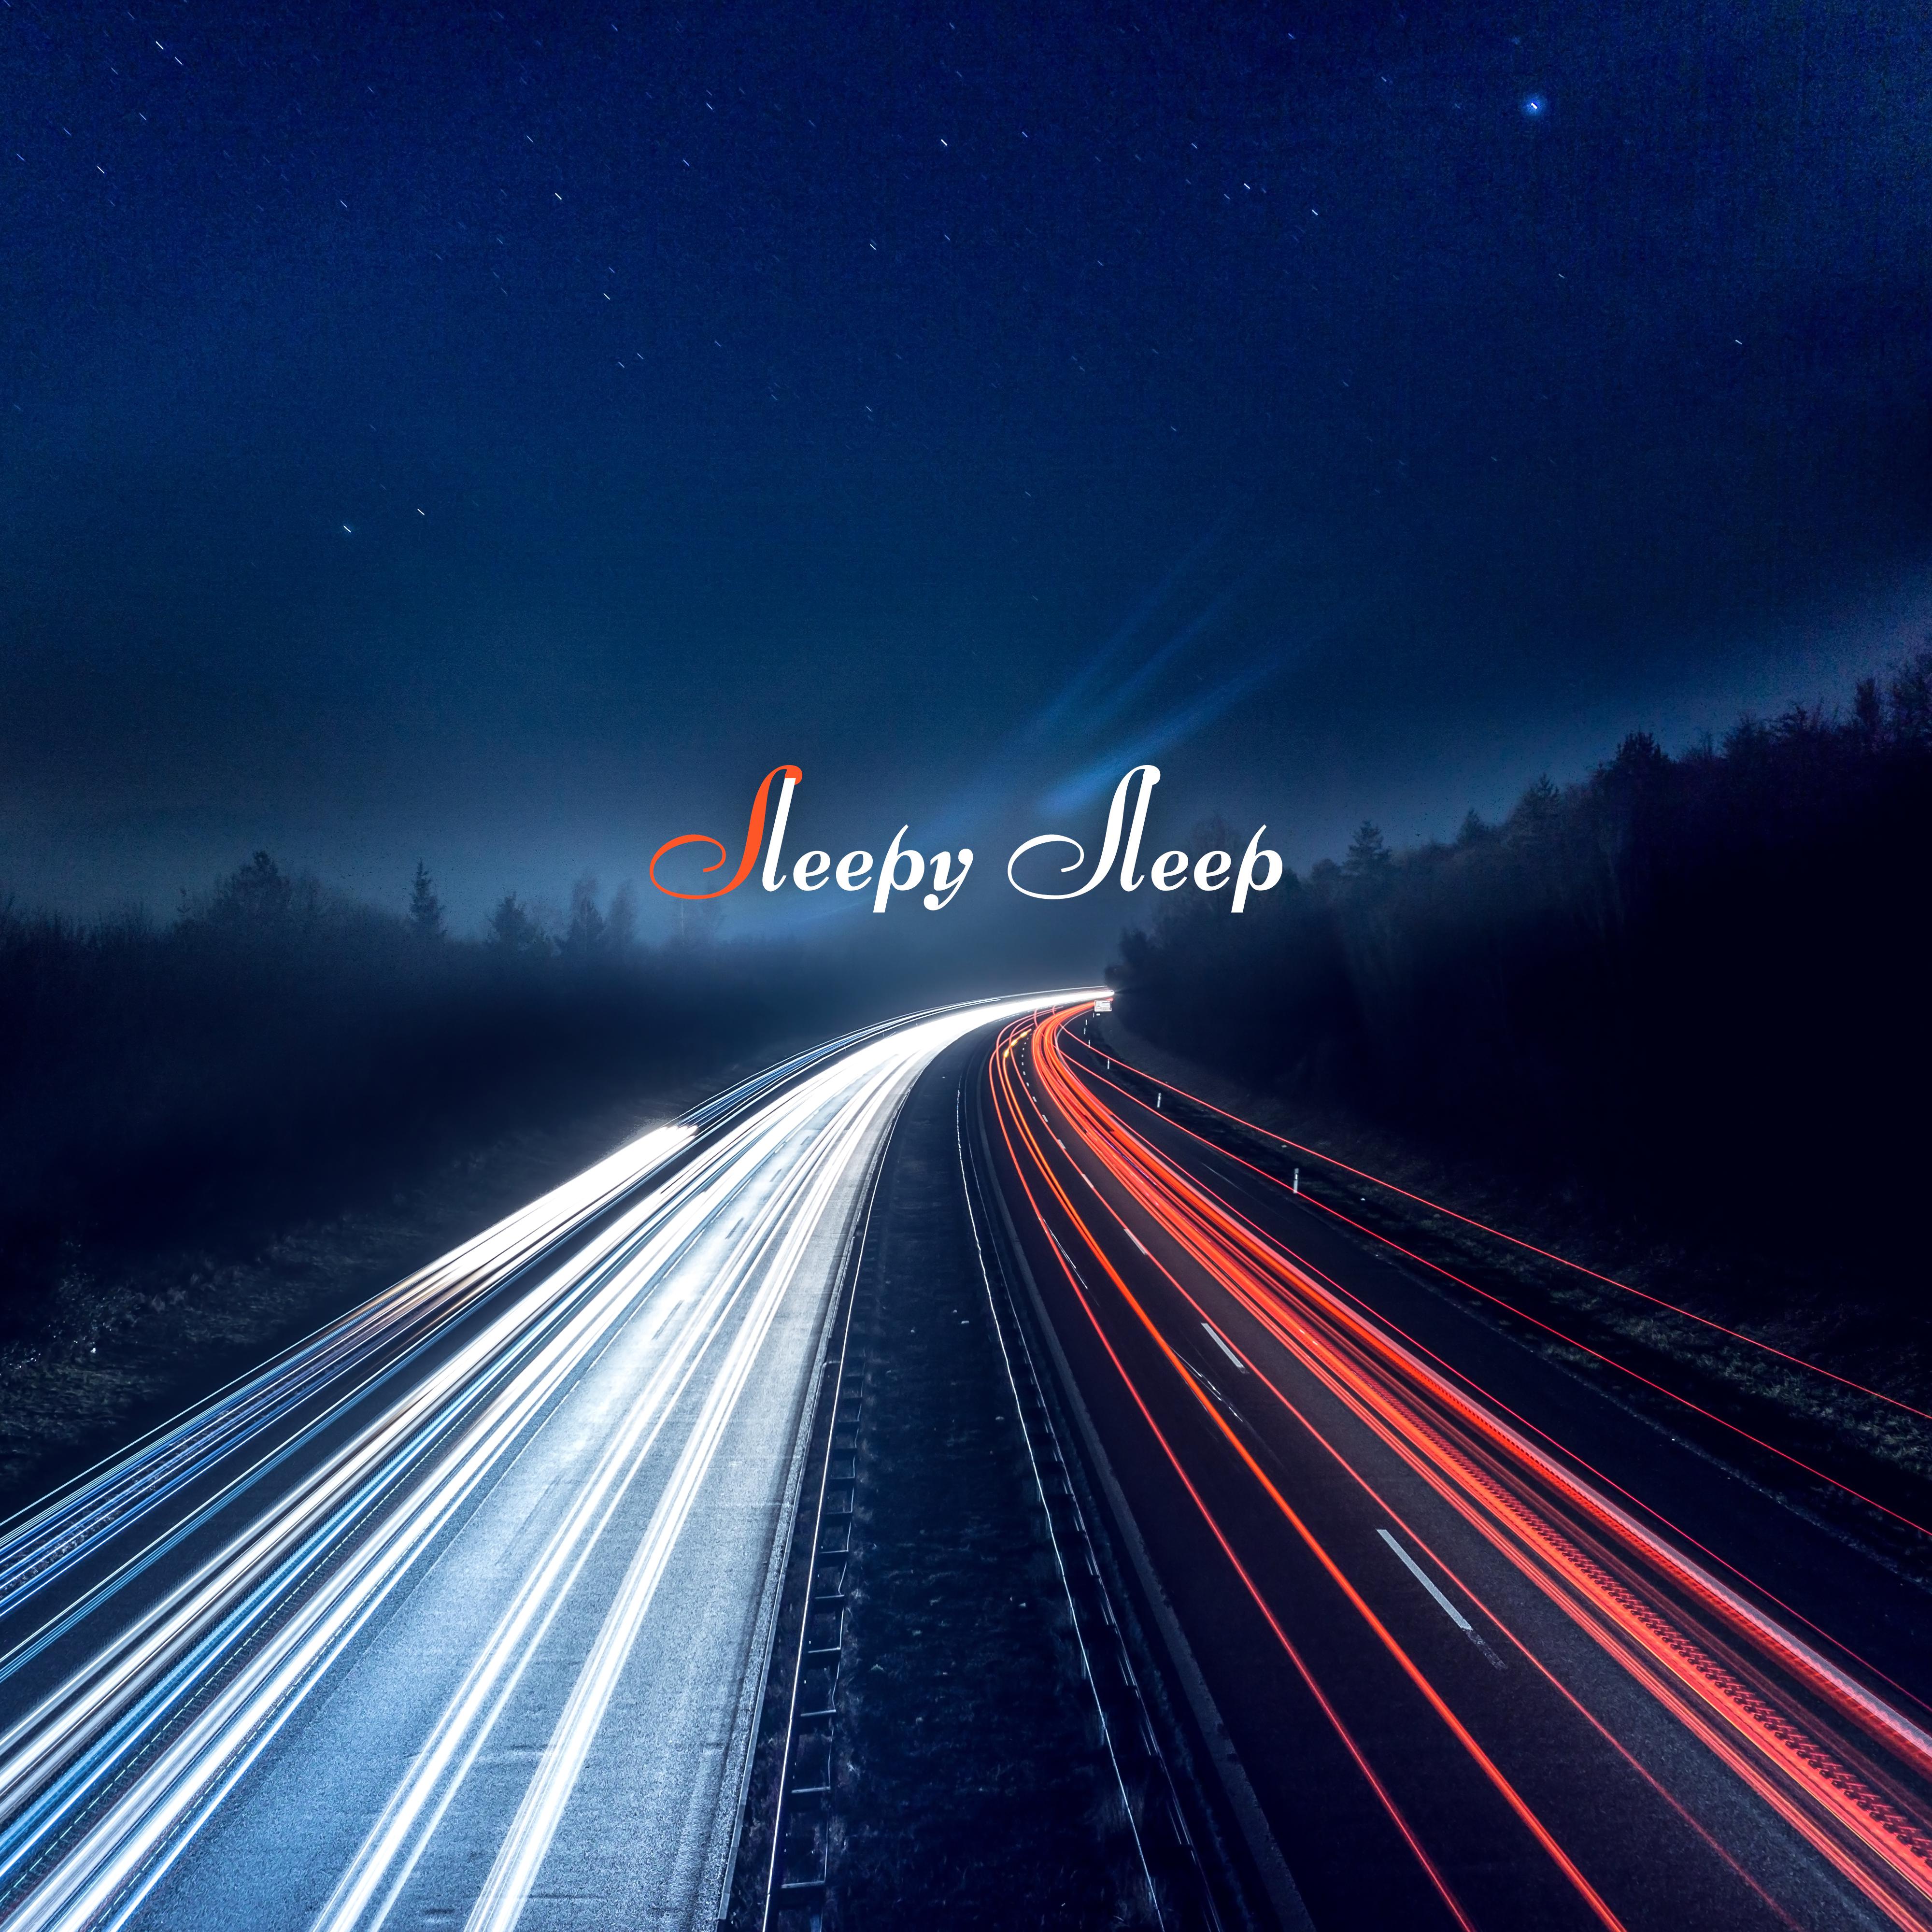 Sleepy Sleep  Relaxing Music to Bed, Nice Dream, Therapy Sounds, Restful Sleep, Healing Lullabies at Goodnight, Harmony